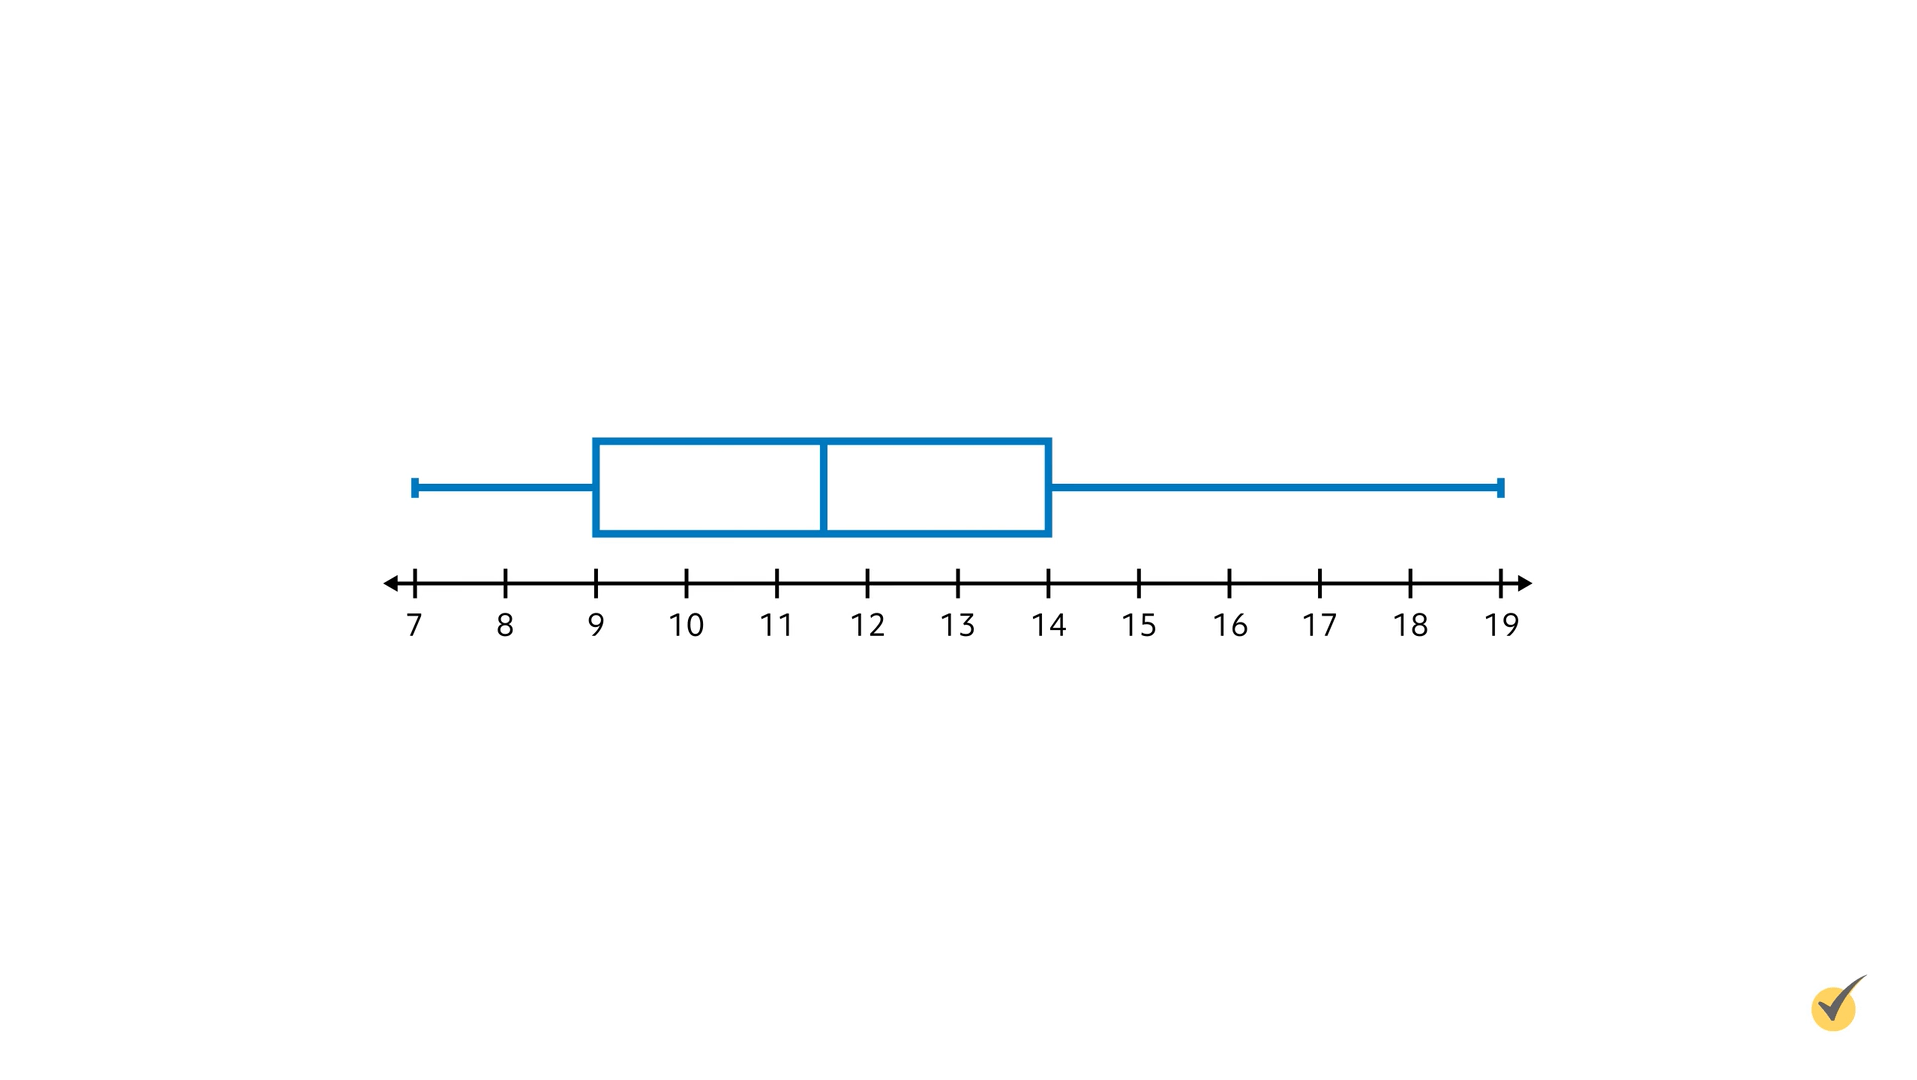 Box and Whisker plot with a median of 11.5, a maximum of 19, and a minimum of 7. 